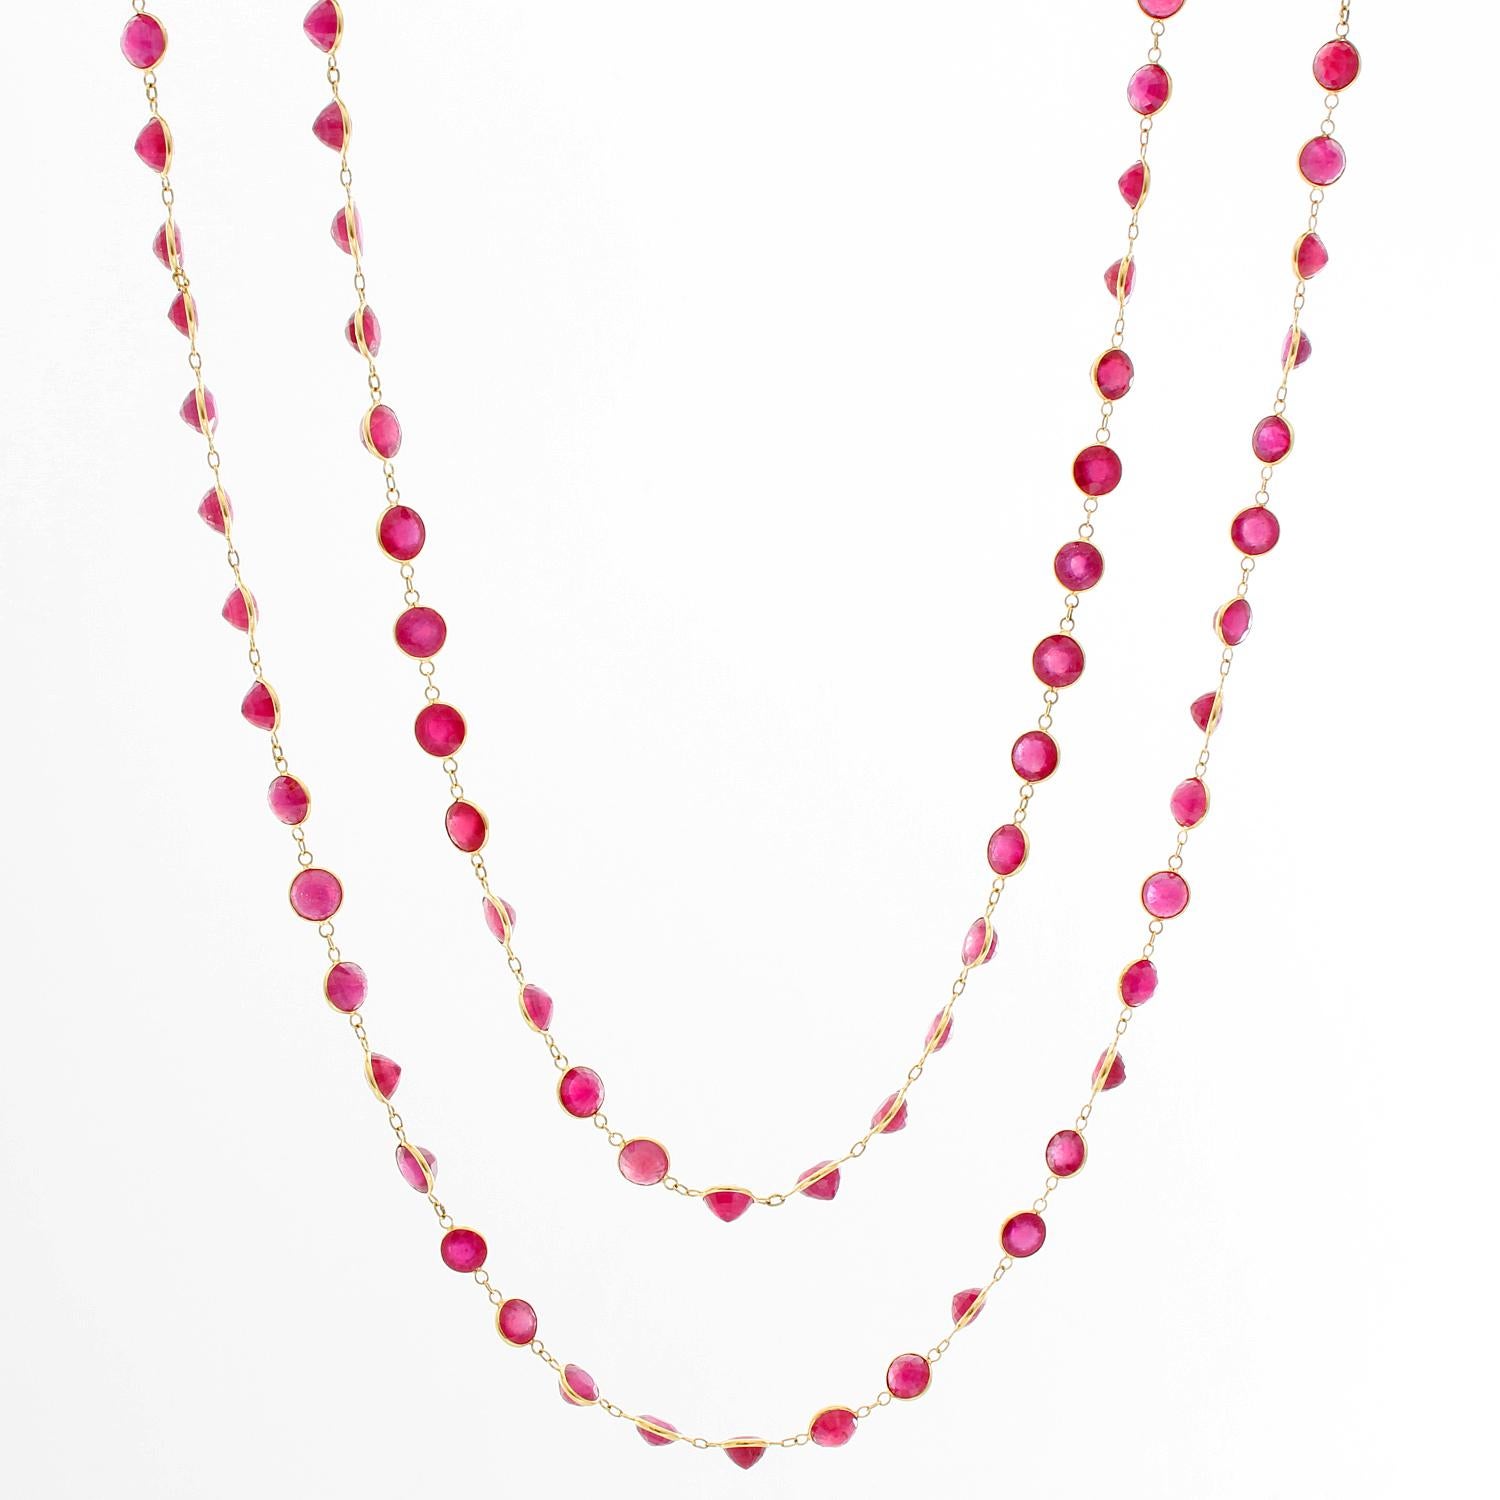 Stunning Ruby and 18K Yellow Gold Necklace - 90 round Rubies are housed on an 18k yellow gold necklace, 3 round links separate each ruby, making this necklace 19 inches long and weighing 25 grams. New with DeMesy box.